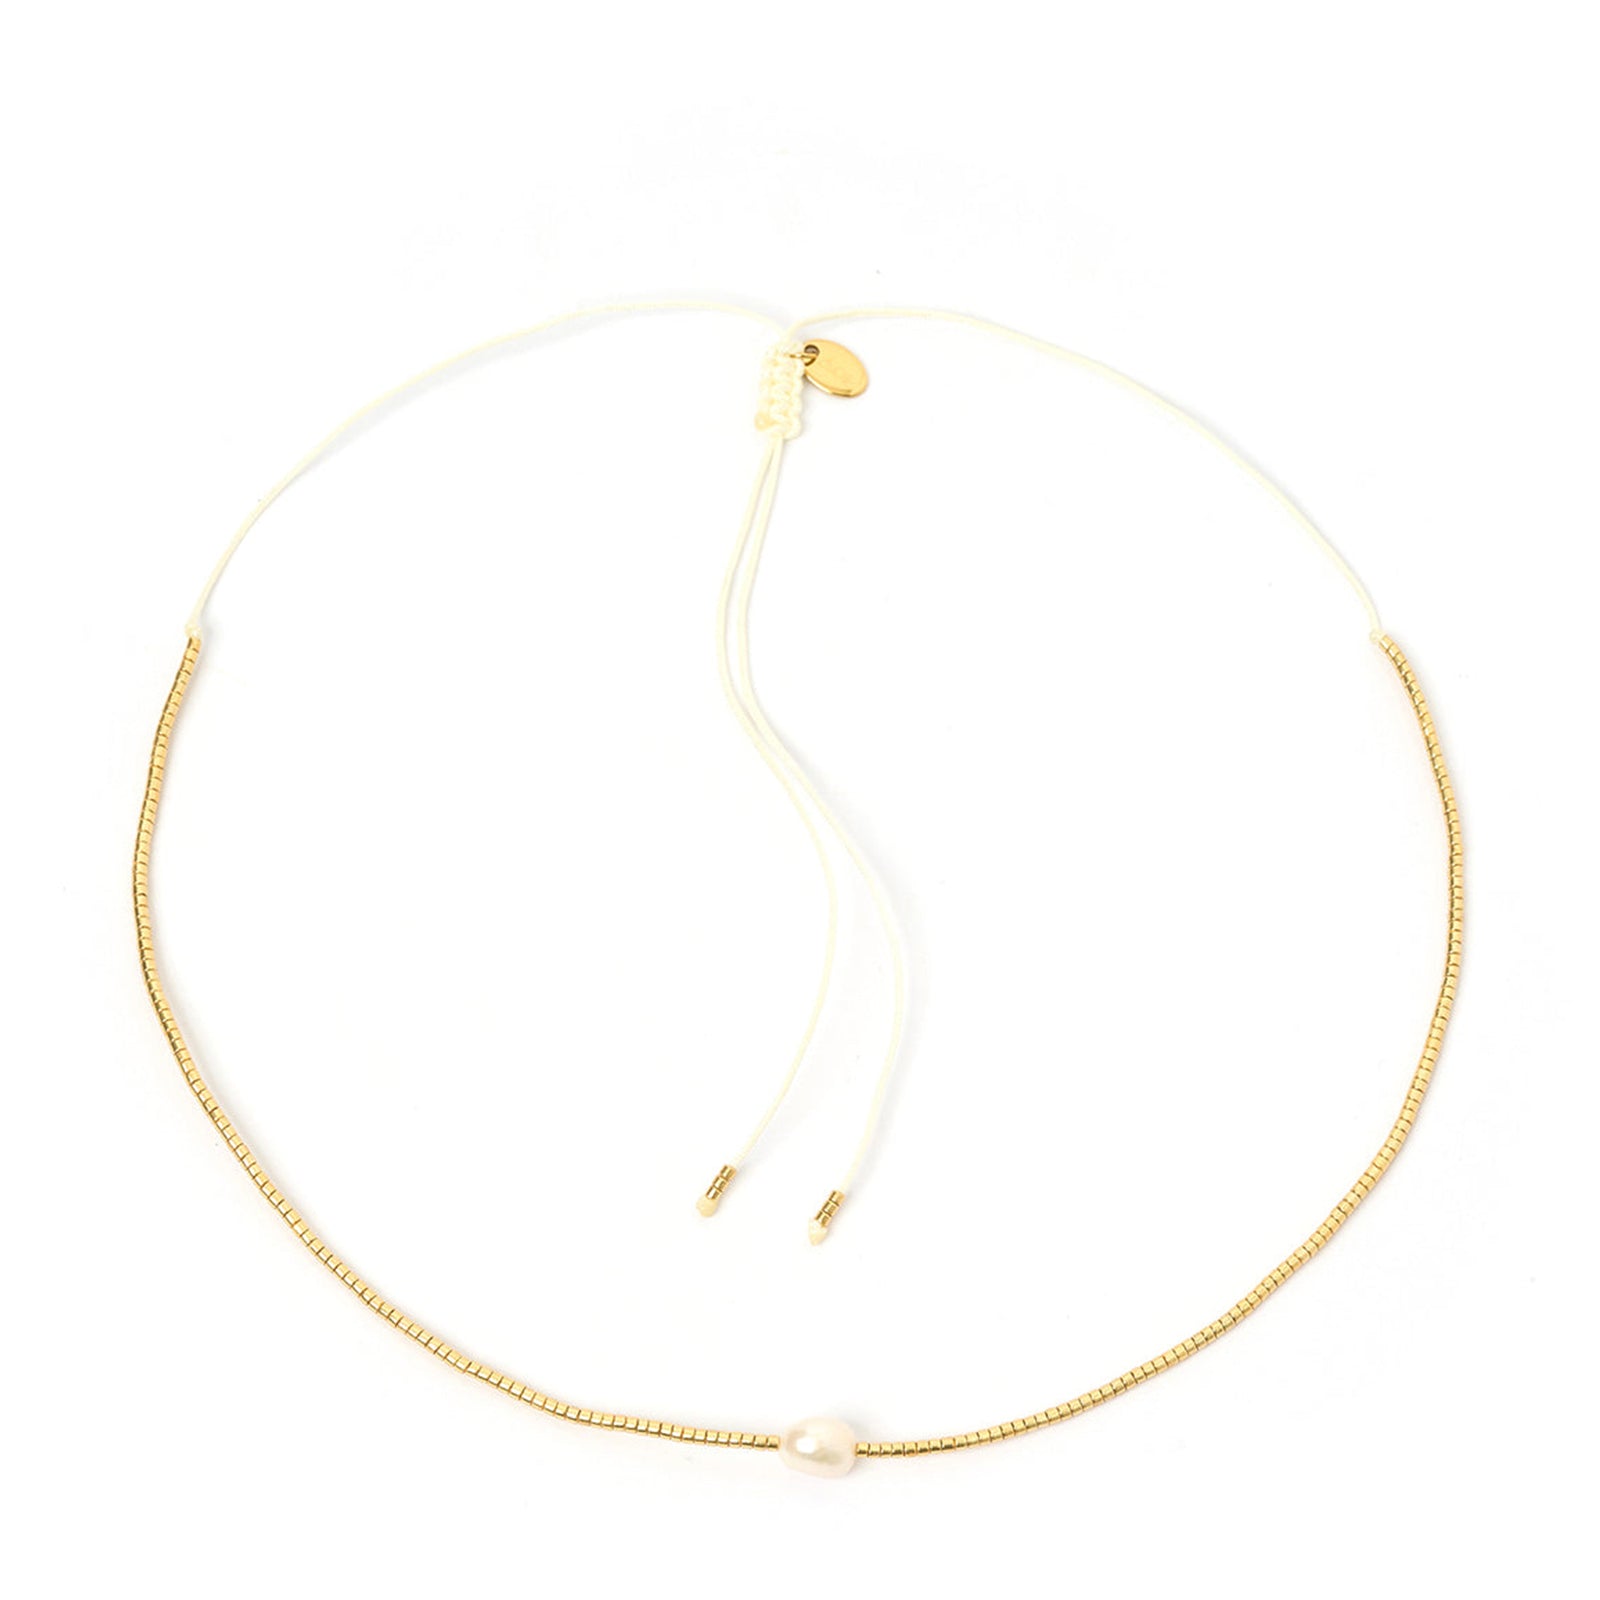 Matilda Pearl & Glass Beaded Necklace - Gold